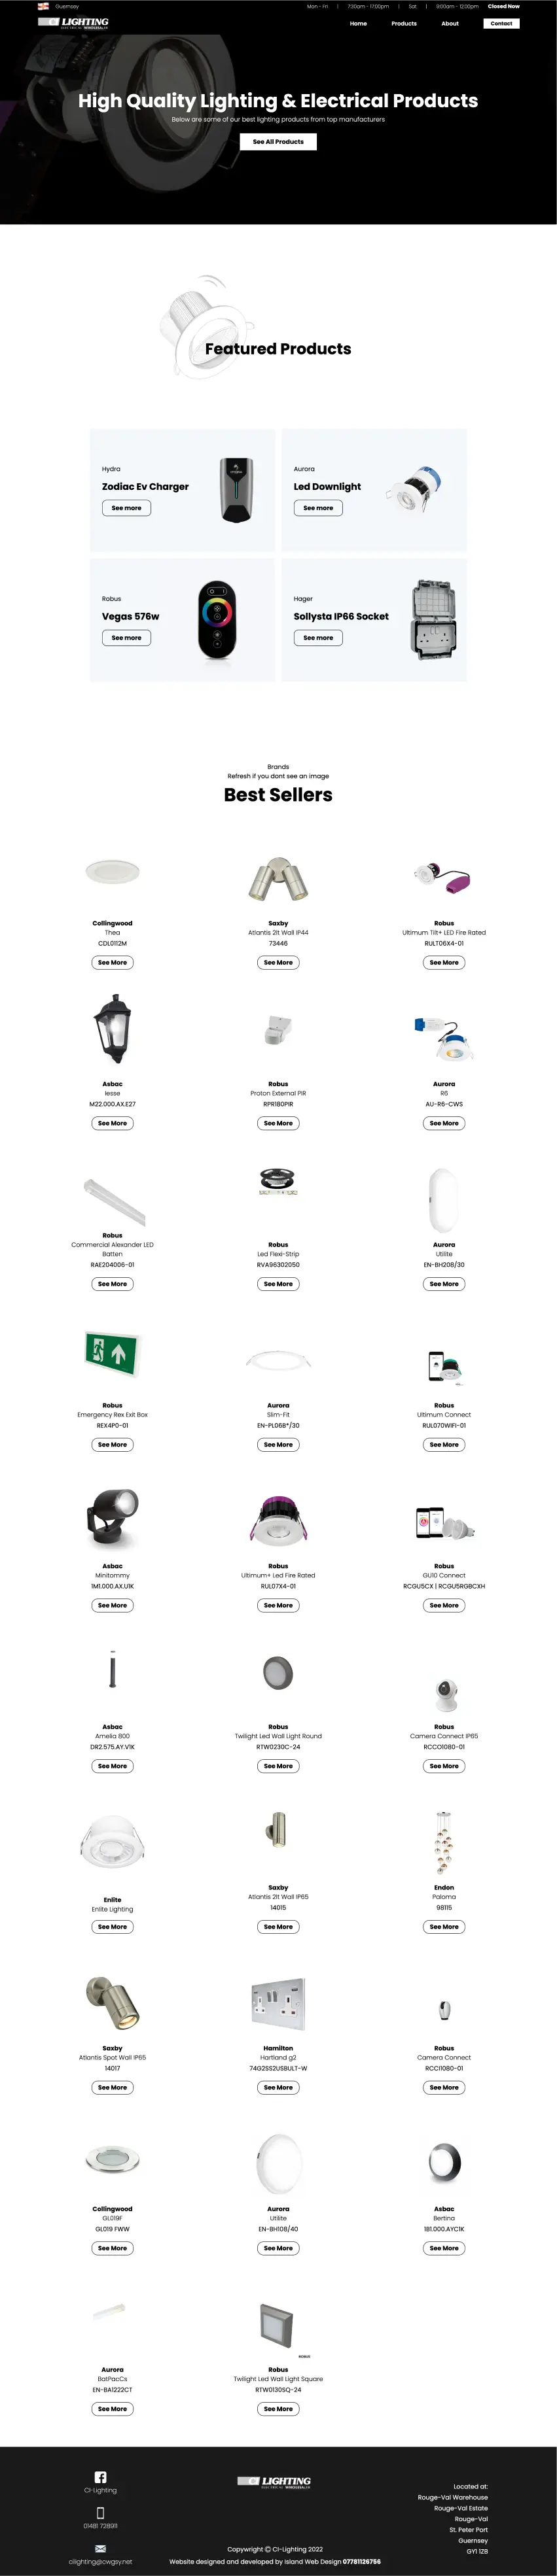 CI Lighting Guernsey Website Product Page